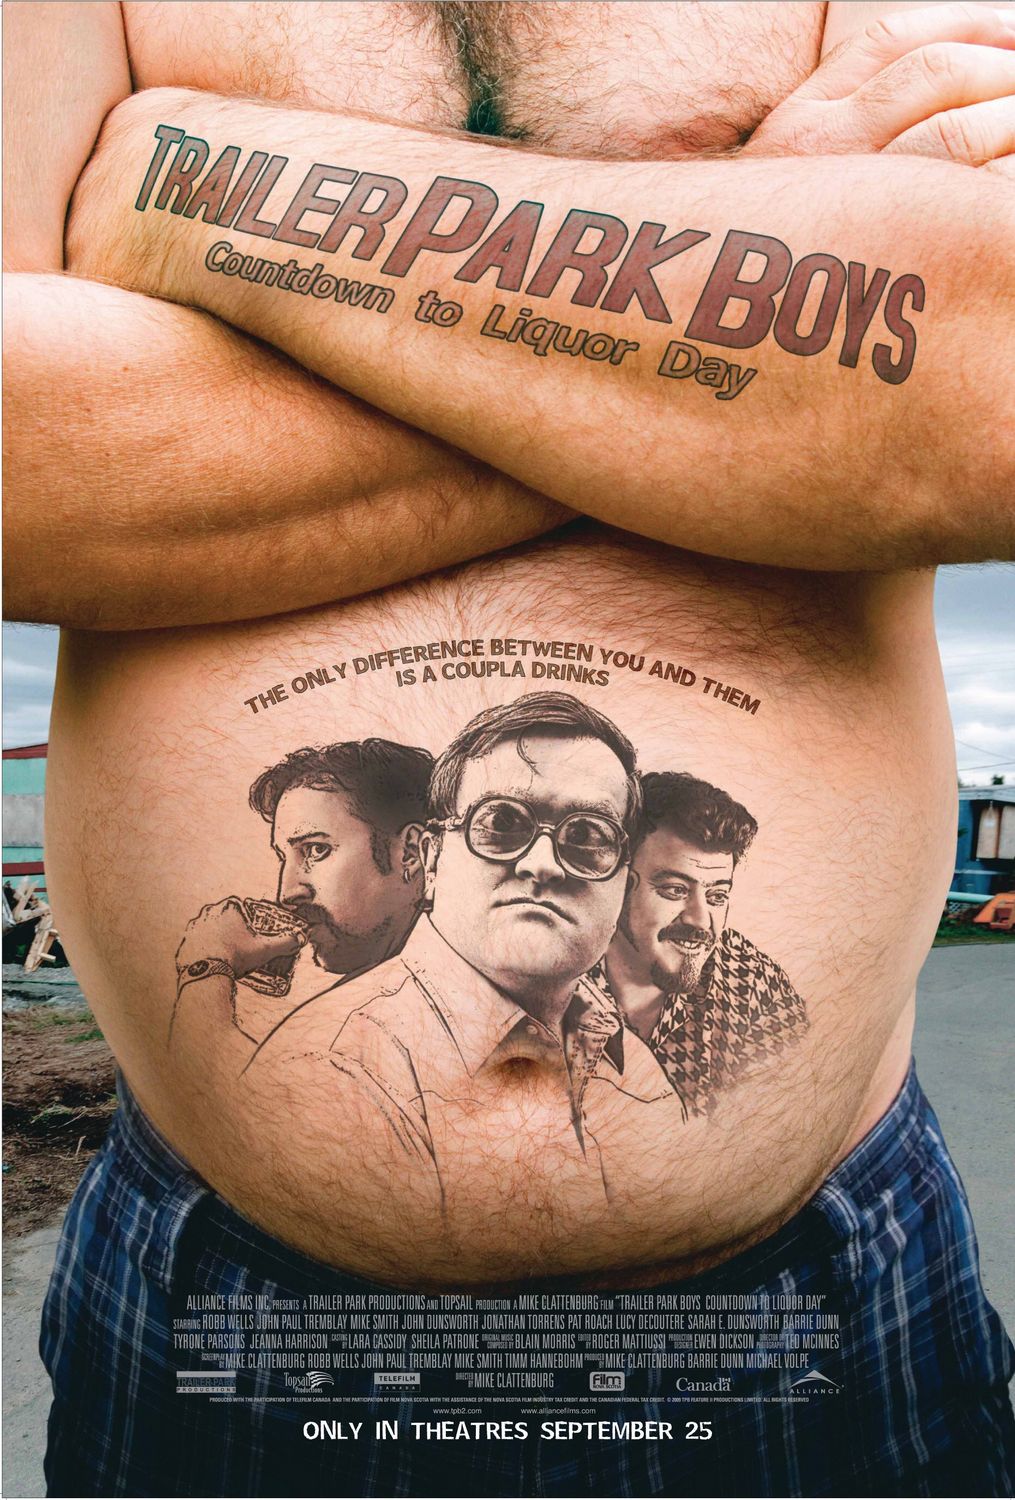 Extra Large Movie Poster Image for Trailer Park Boys: Countdown to Liquor Day 